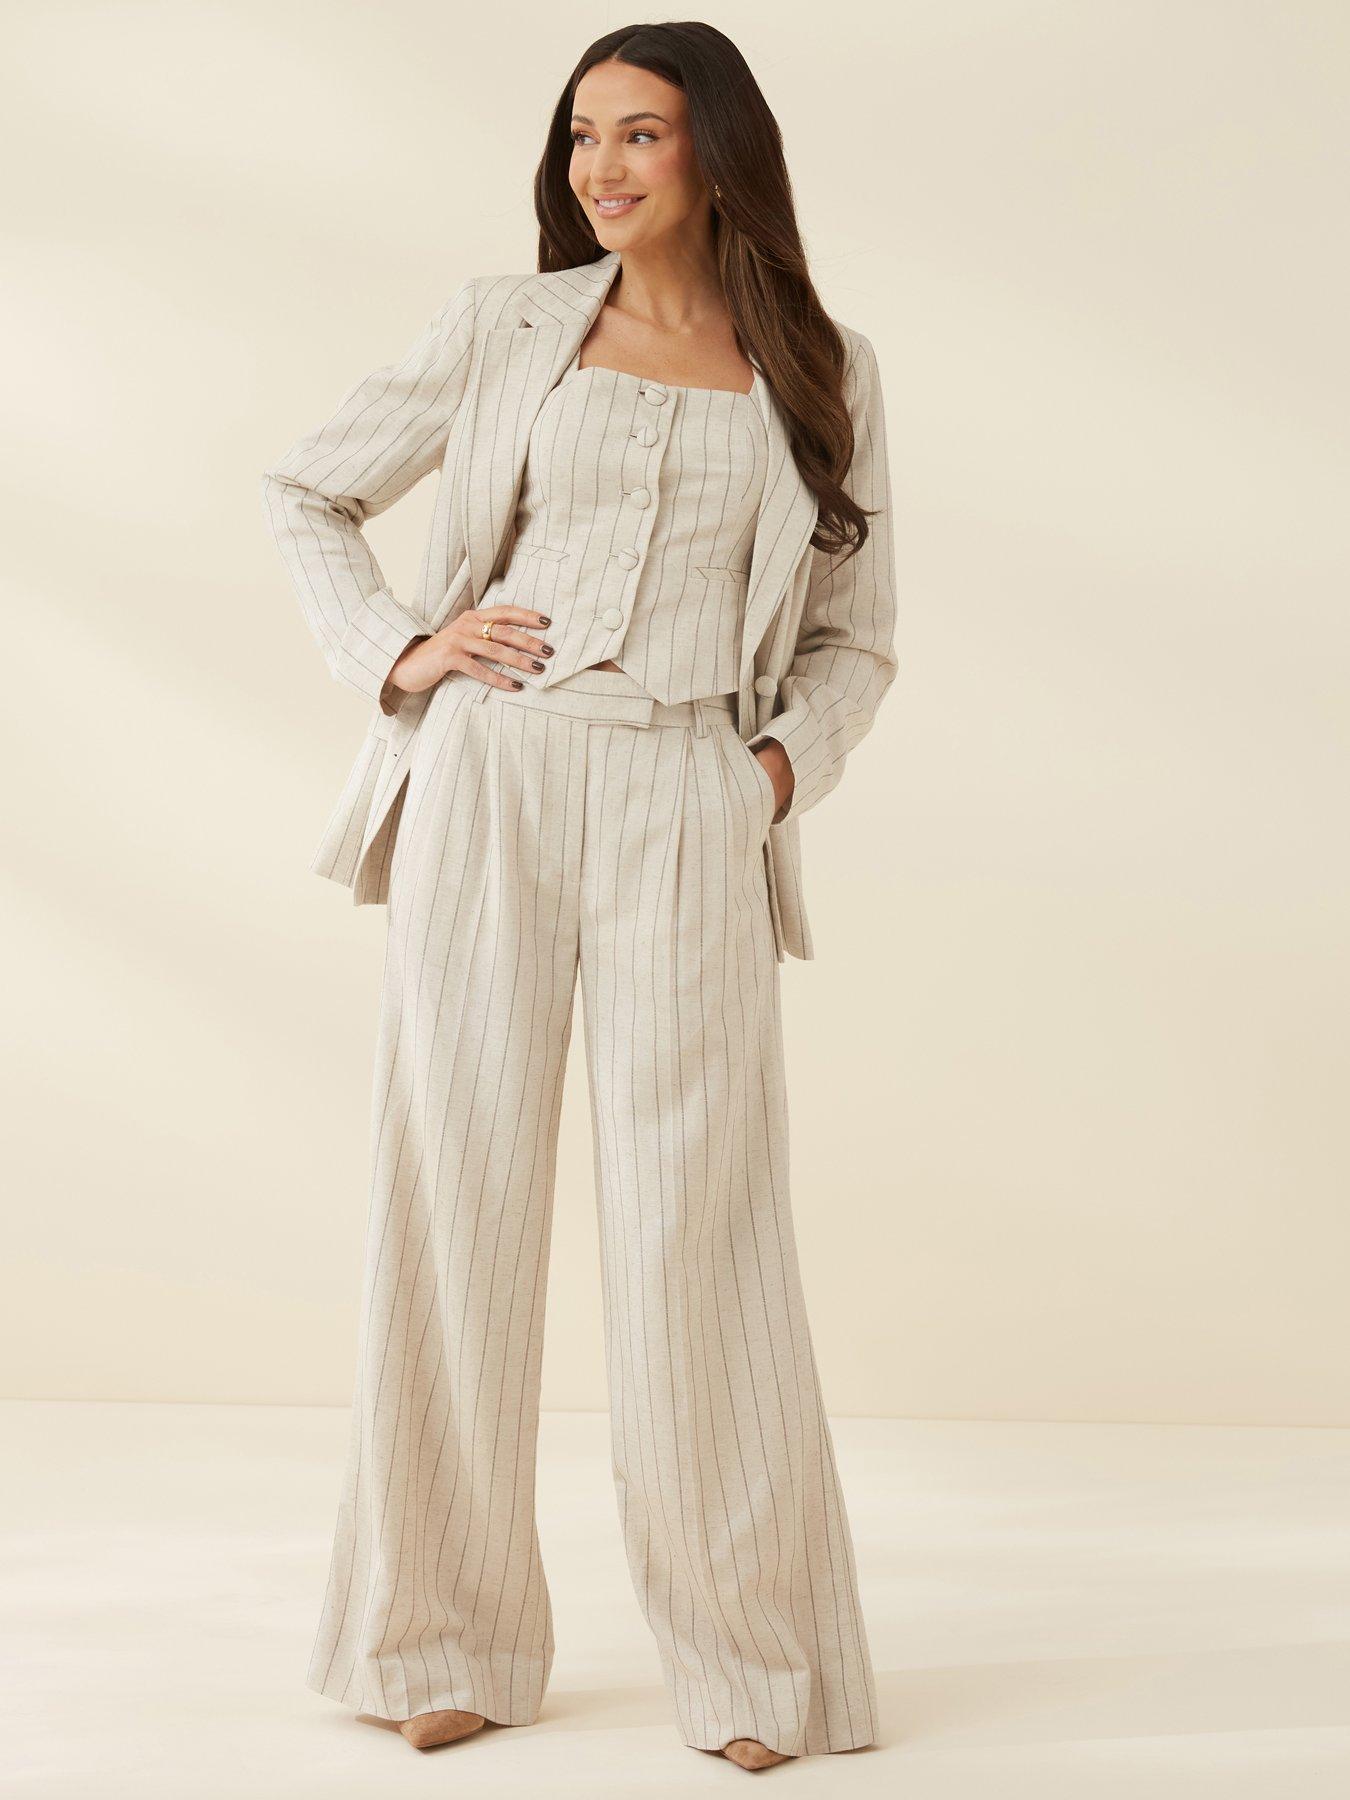 River Island Petite blazer and pleated wide leg trouser in light